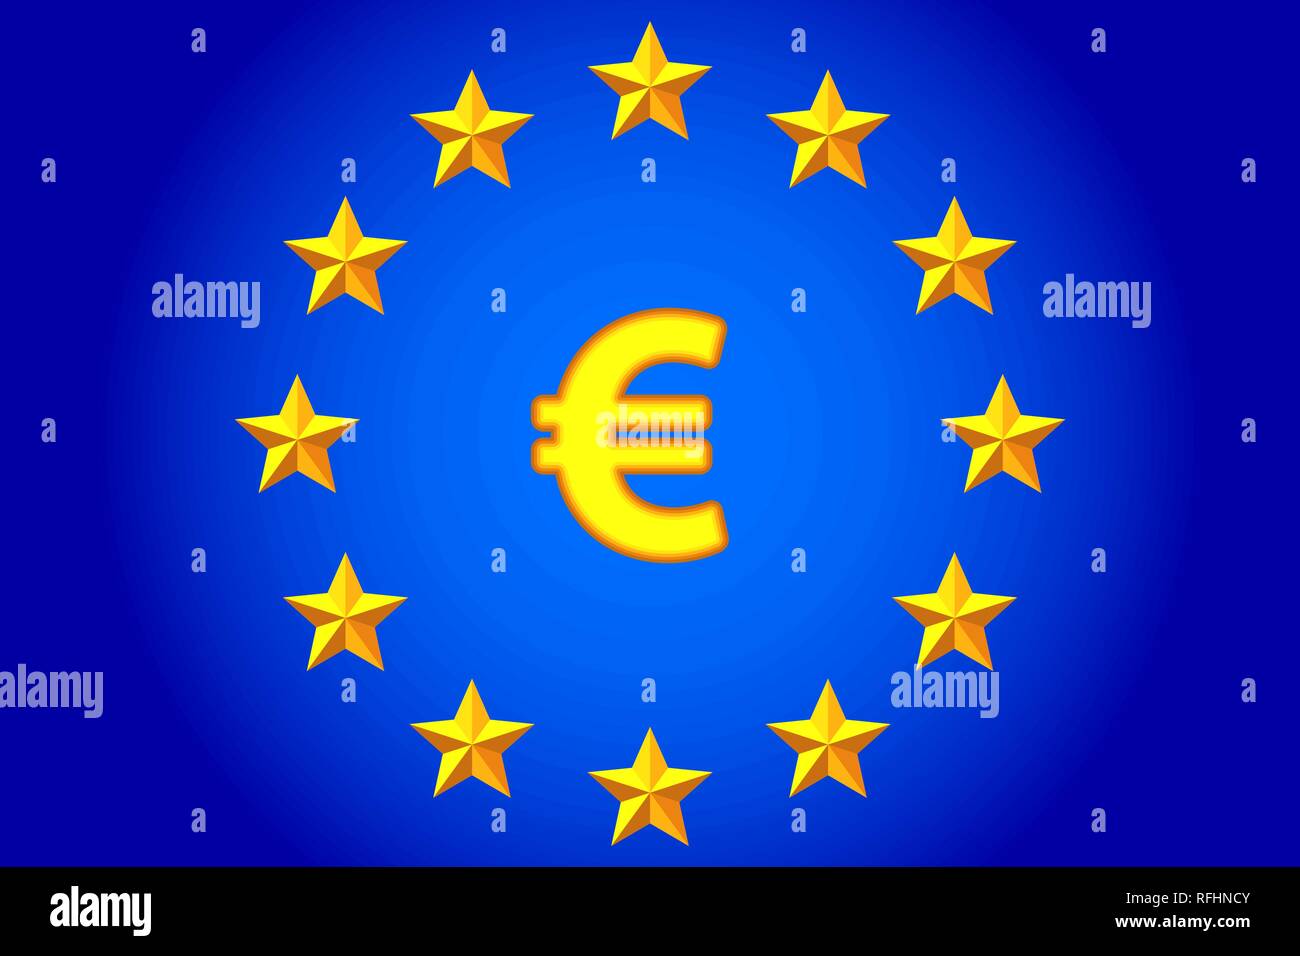 National flag of the European Union and euro symbol Stock Vector